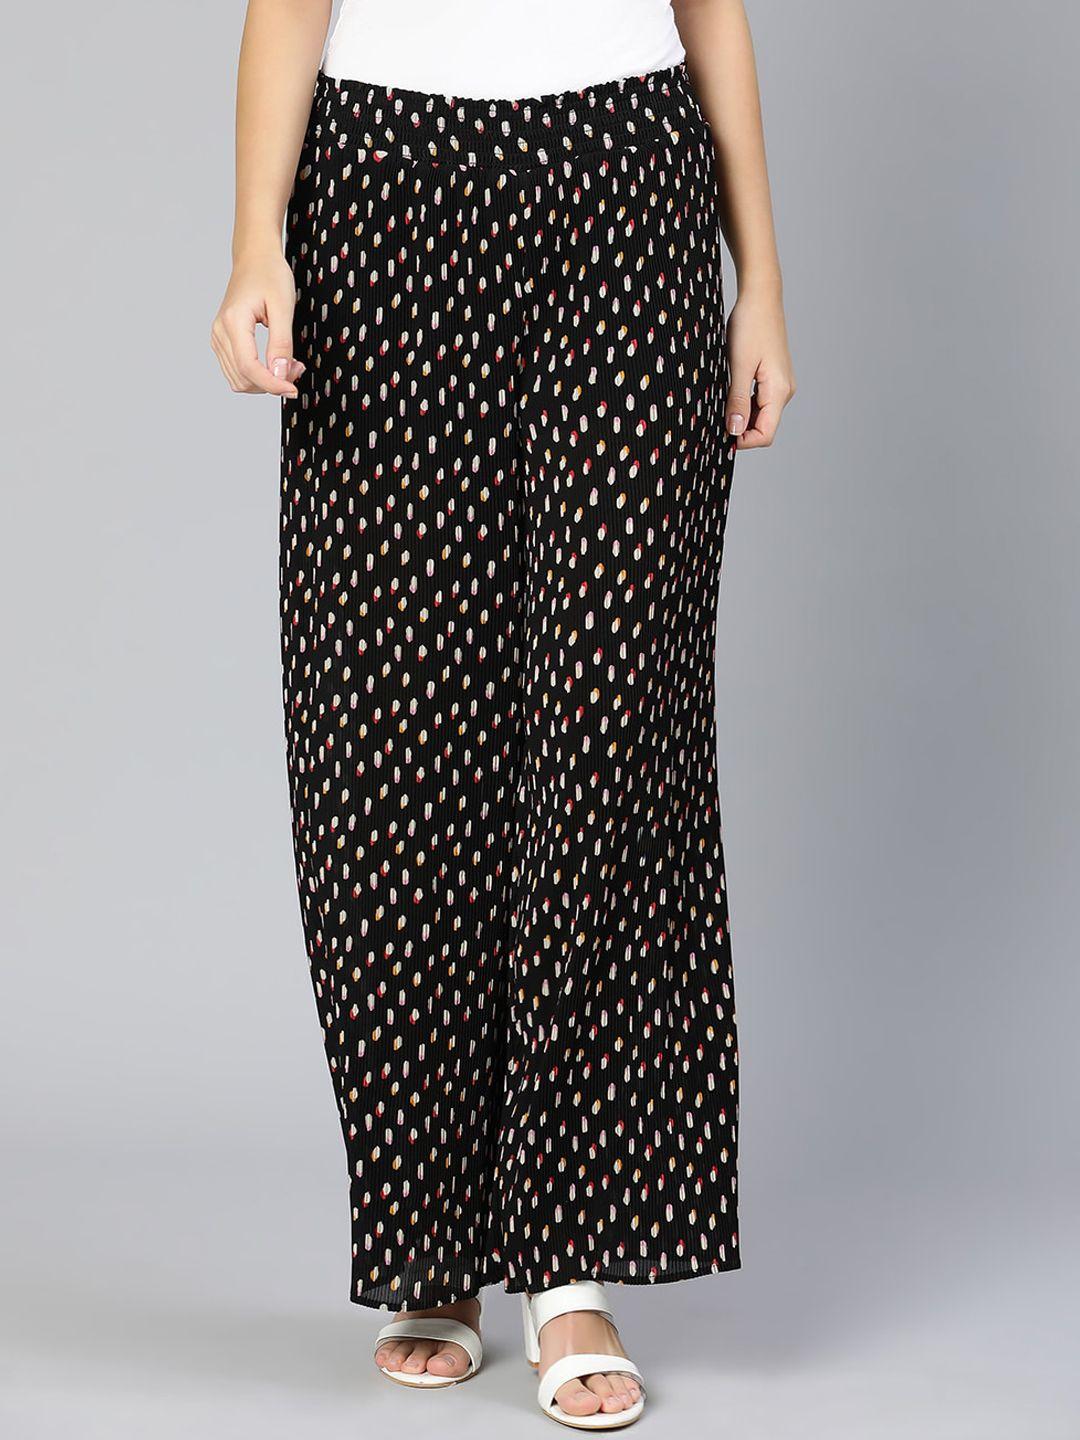 oxolloxo women black printed trousers